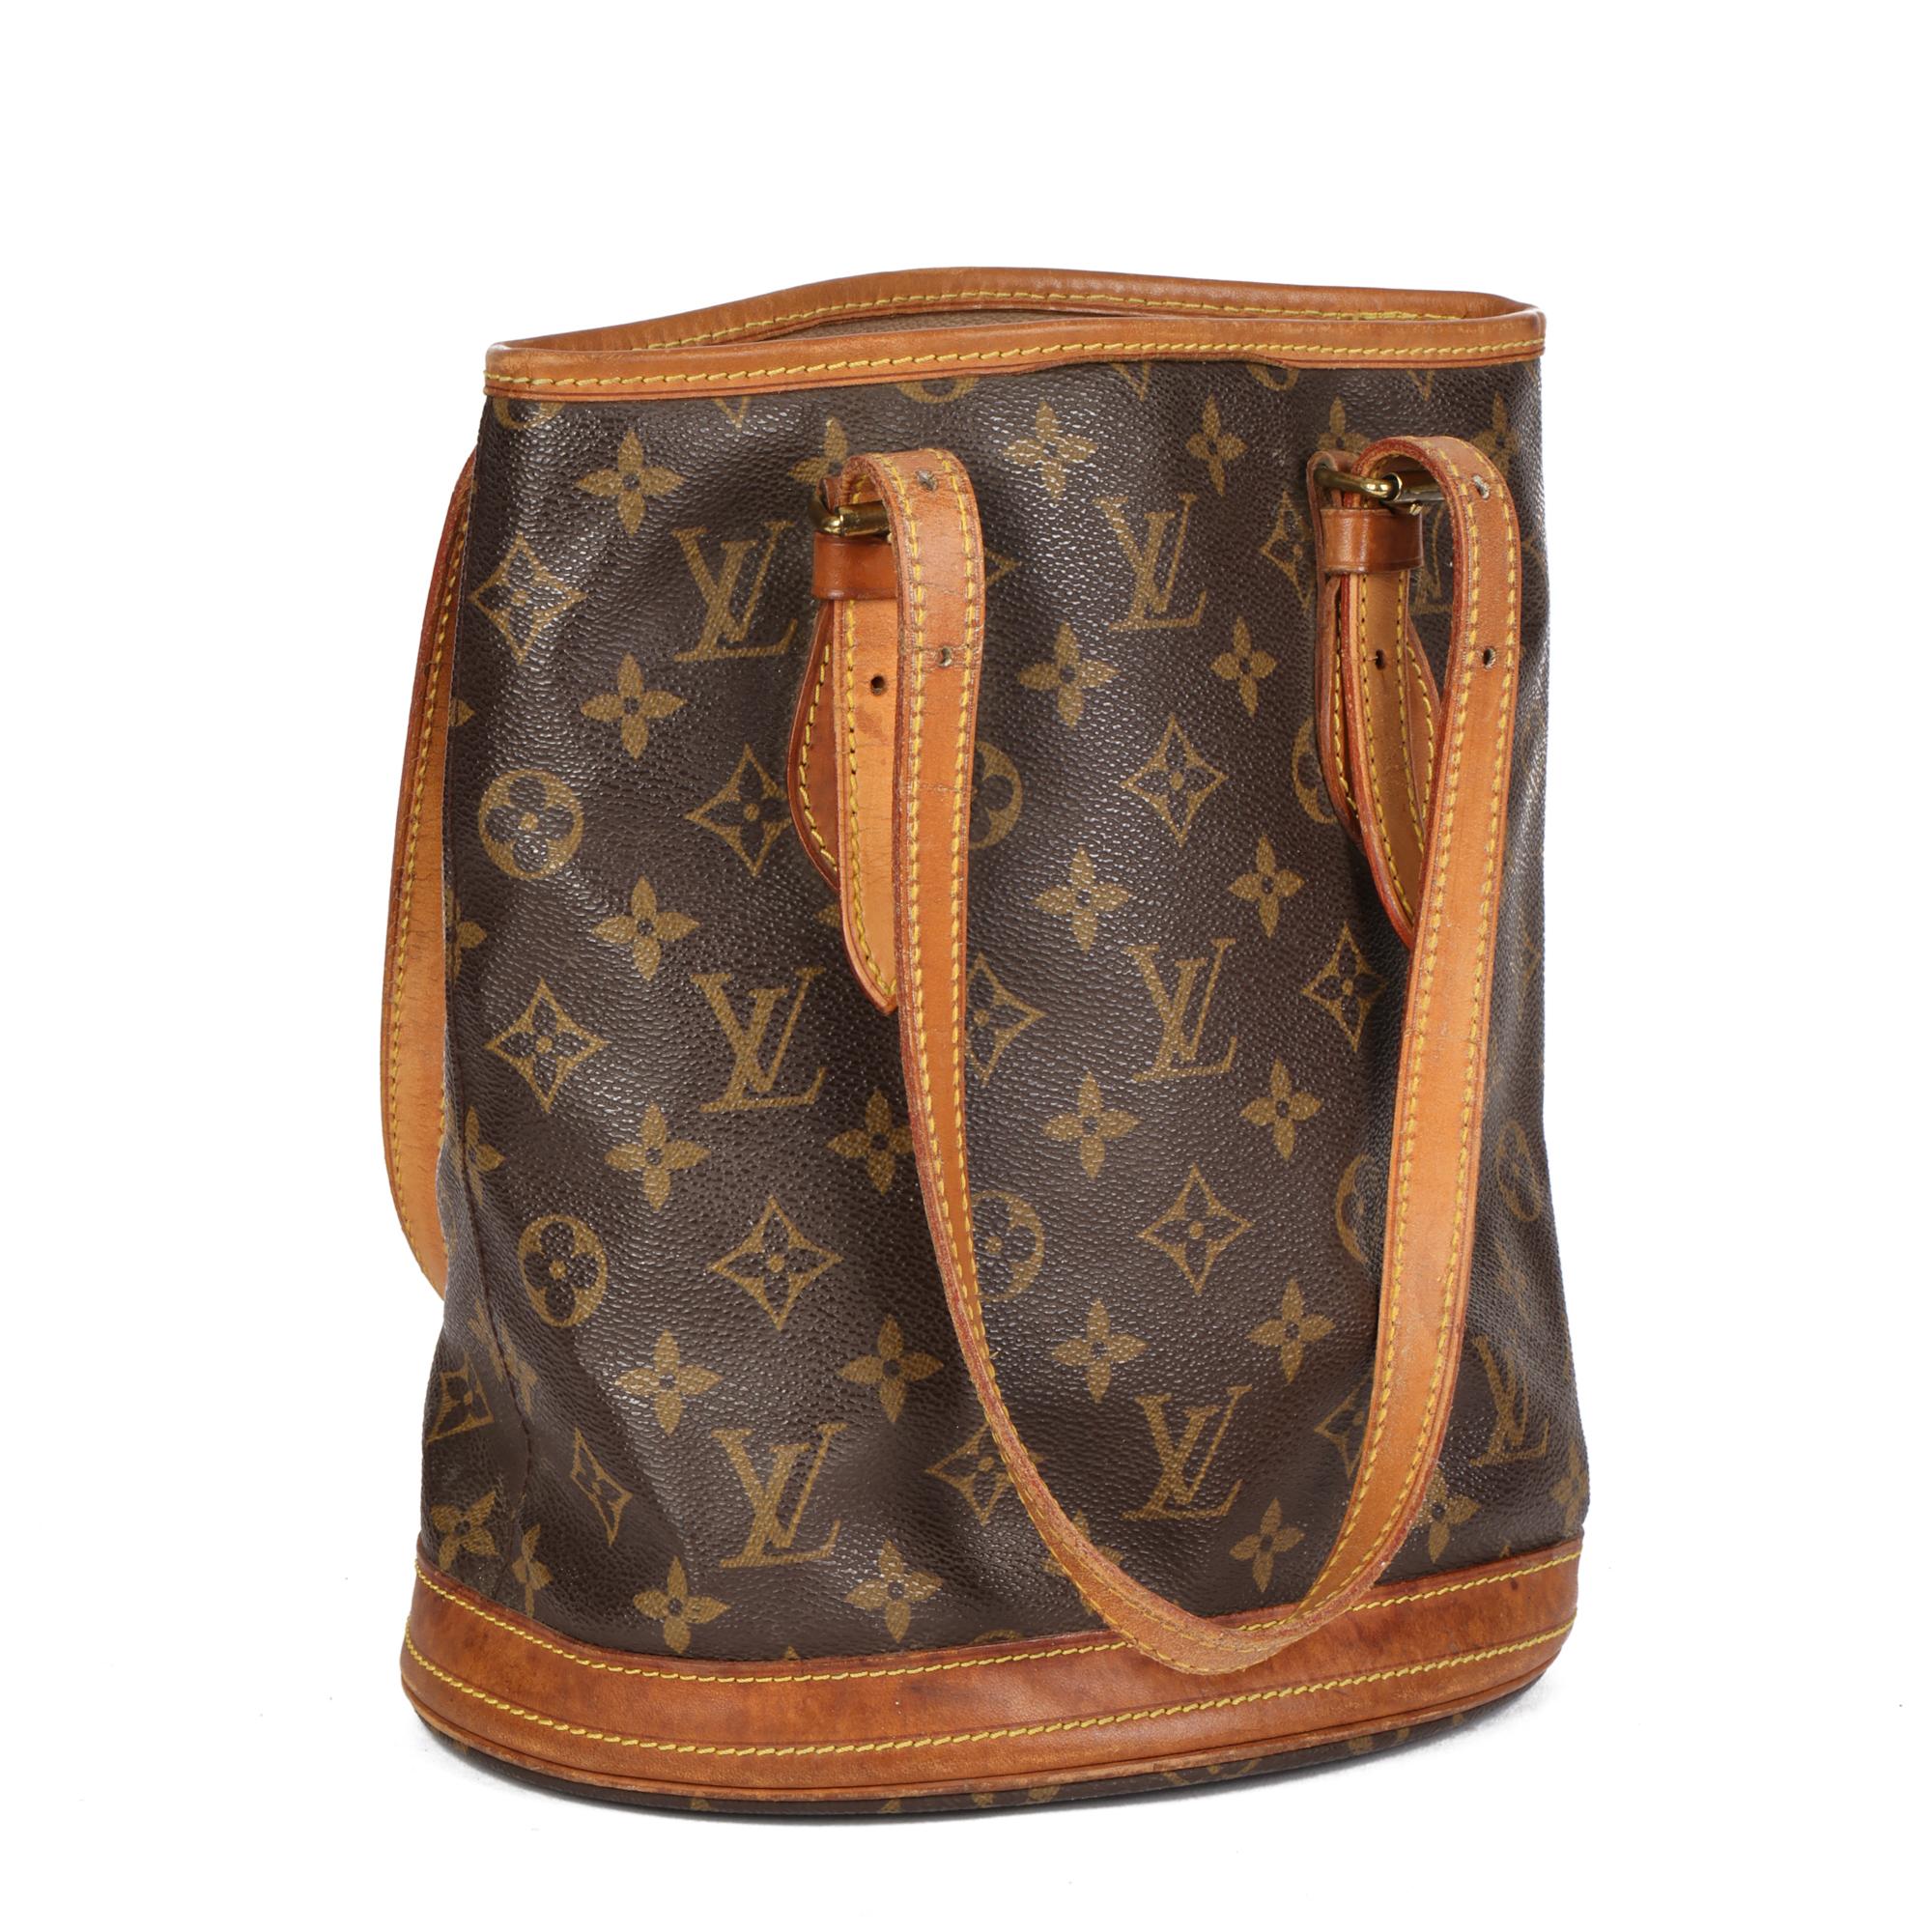 LOUIS VUITTON
Brown Monogram Coated Canvas & Vachetta Leather Bucket Bag PM with Pouch

Xupes Reference: CB632
Serial Number: DK4087
Age (Circa): 2007
Accompanied By: Interior Pouch
Authenticity Details: Date Stamp (Made in France)
Gender: